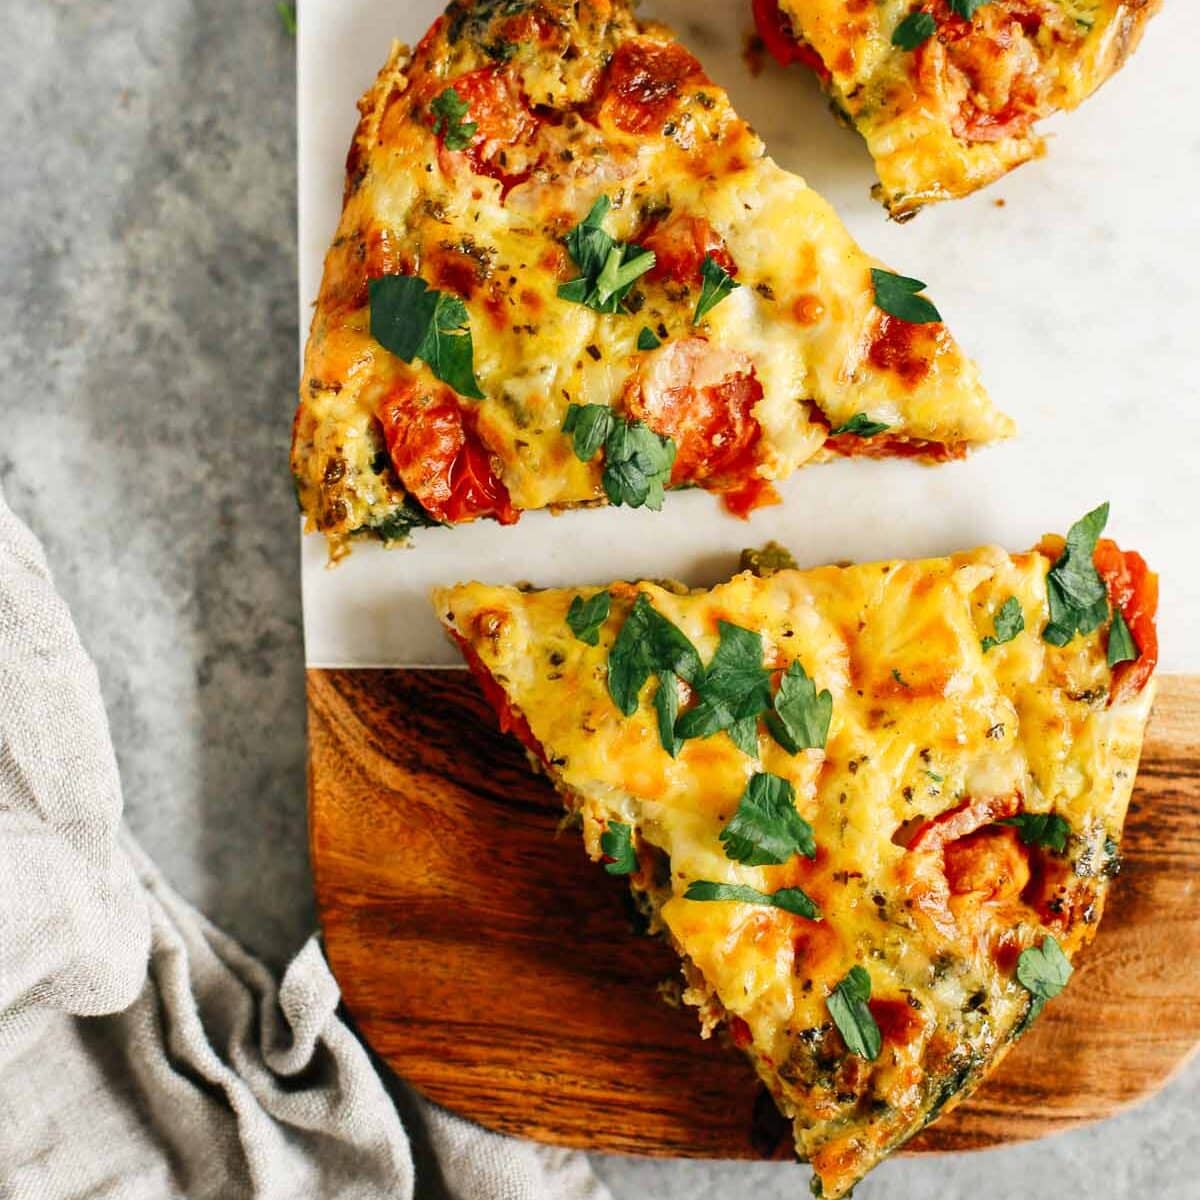 Vegetable frittata cut into pieces on a wooden serving board.